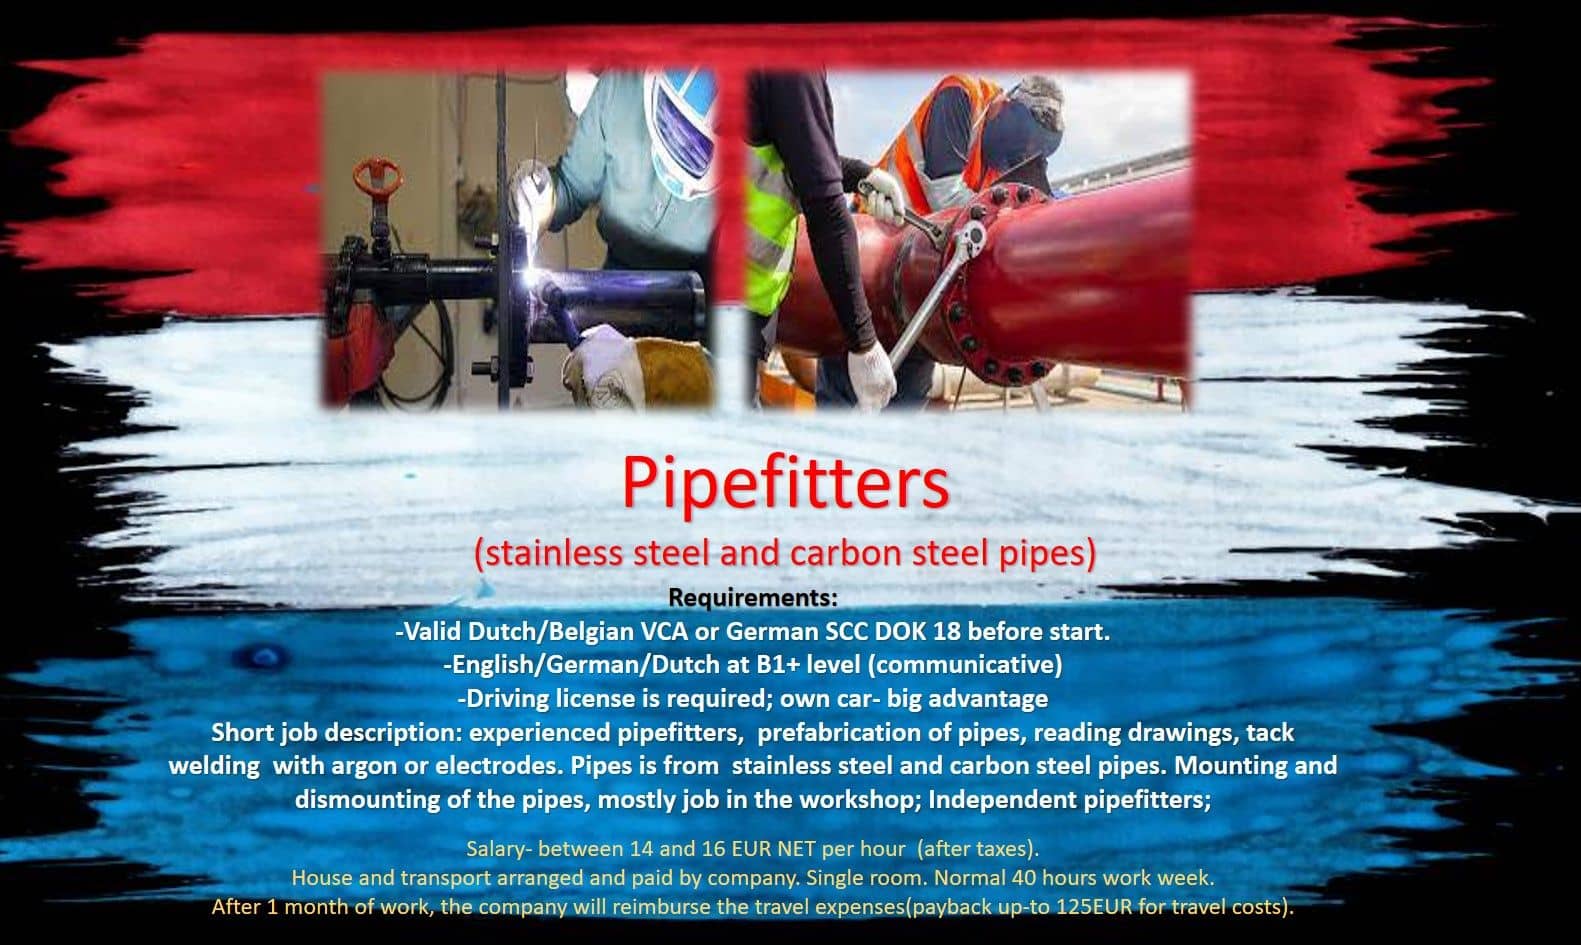 Jobs Netherlands Work Holland, Amsterdam, Rotterdam, Eindhoven, Tilburg, Arnhem, Den Hague, Experienced pipefitter, Pipefitters, job, work in the Netherlands Holland Amsterdam, Eindhoven, Rotterdam, Haarlem, Pipes, Prefabrication of pipes, Mounting pipes, Dismounting pipes, Pipefitter job, Pipefitter helper jobs